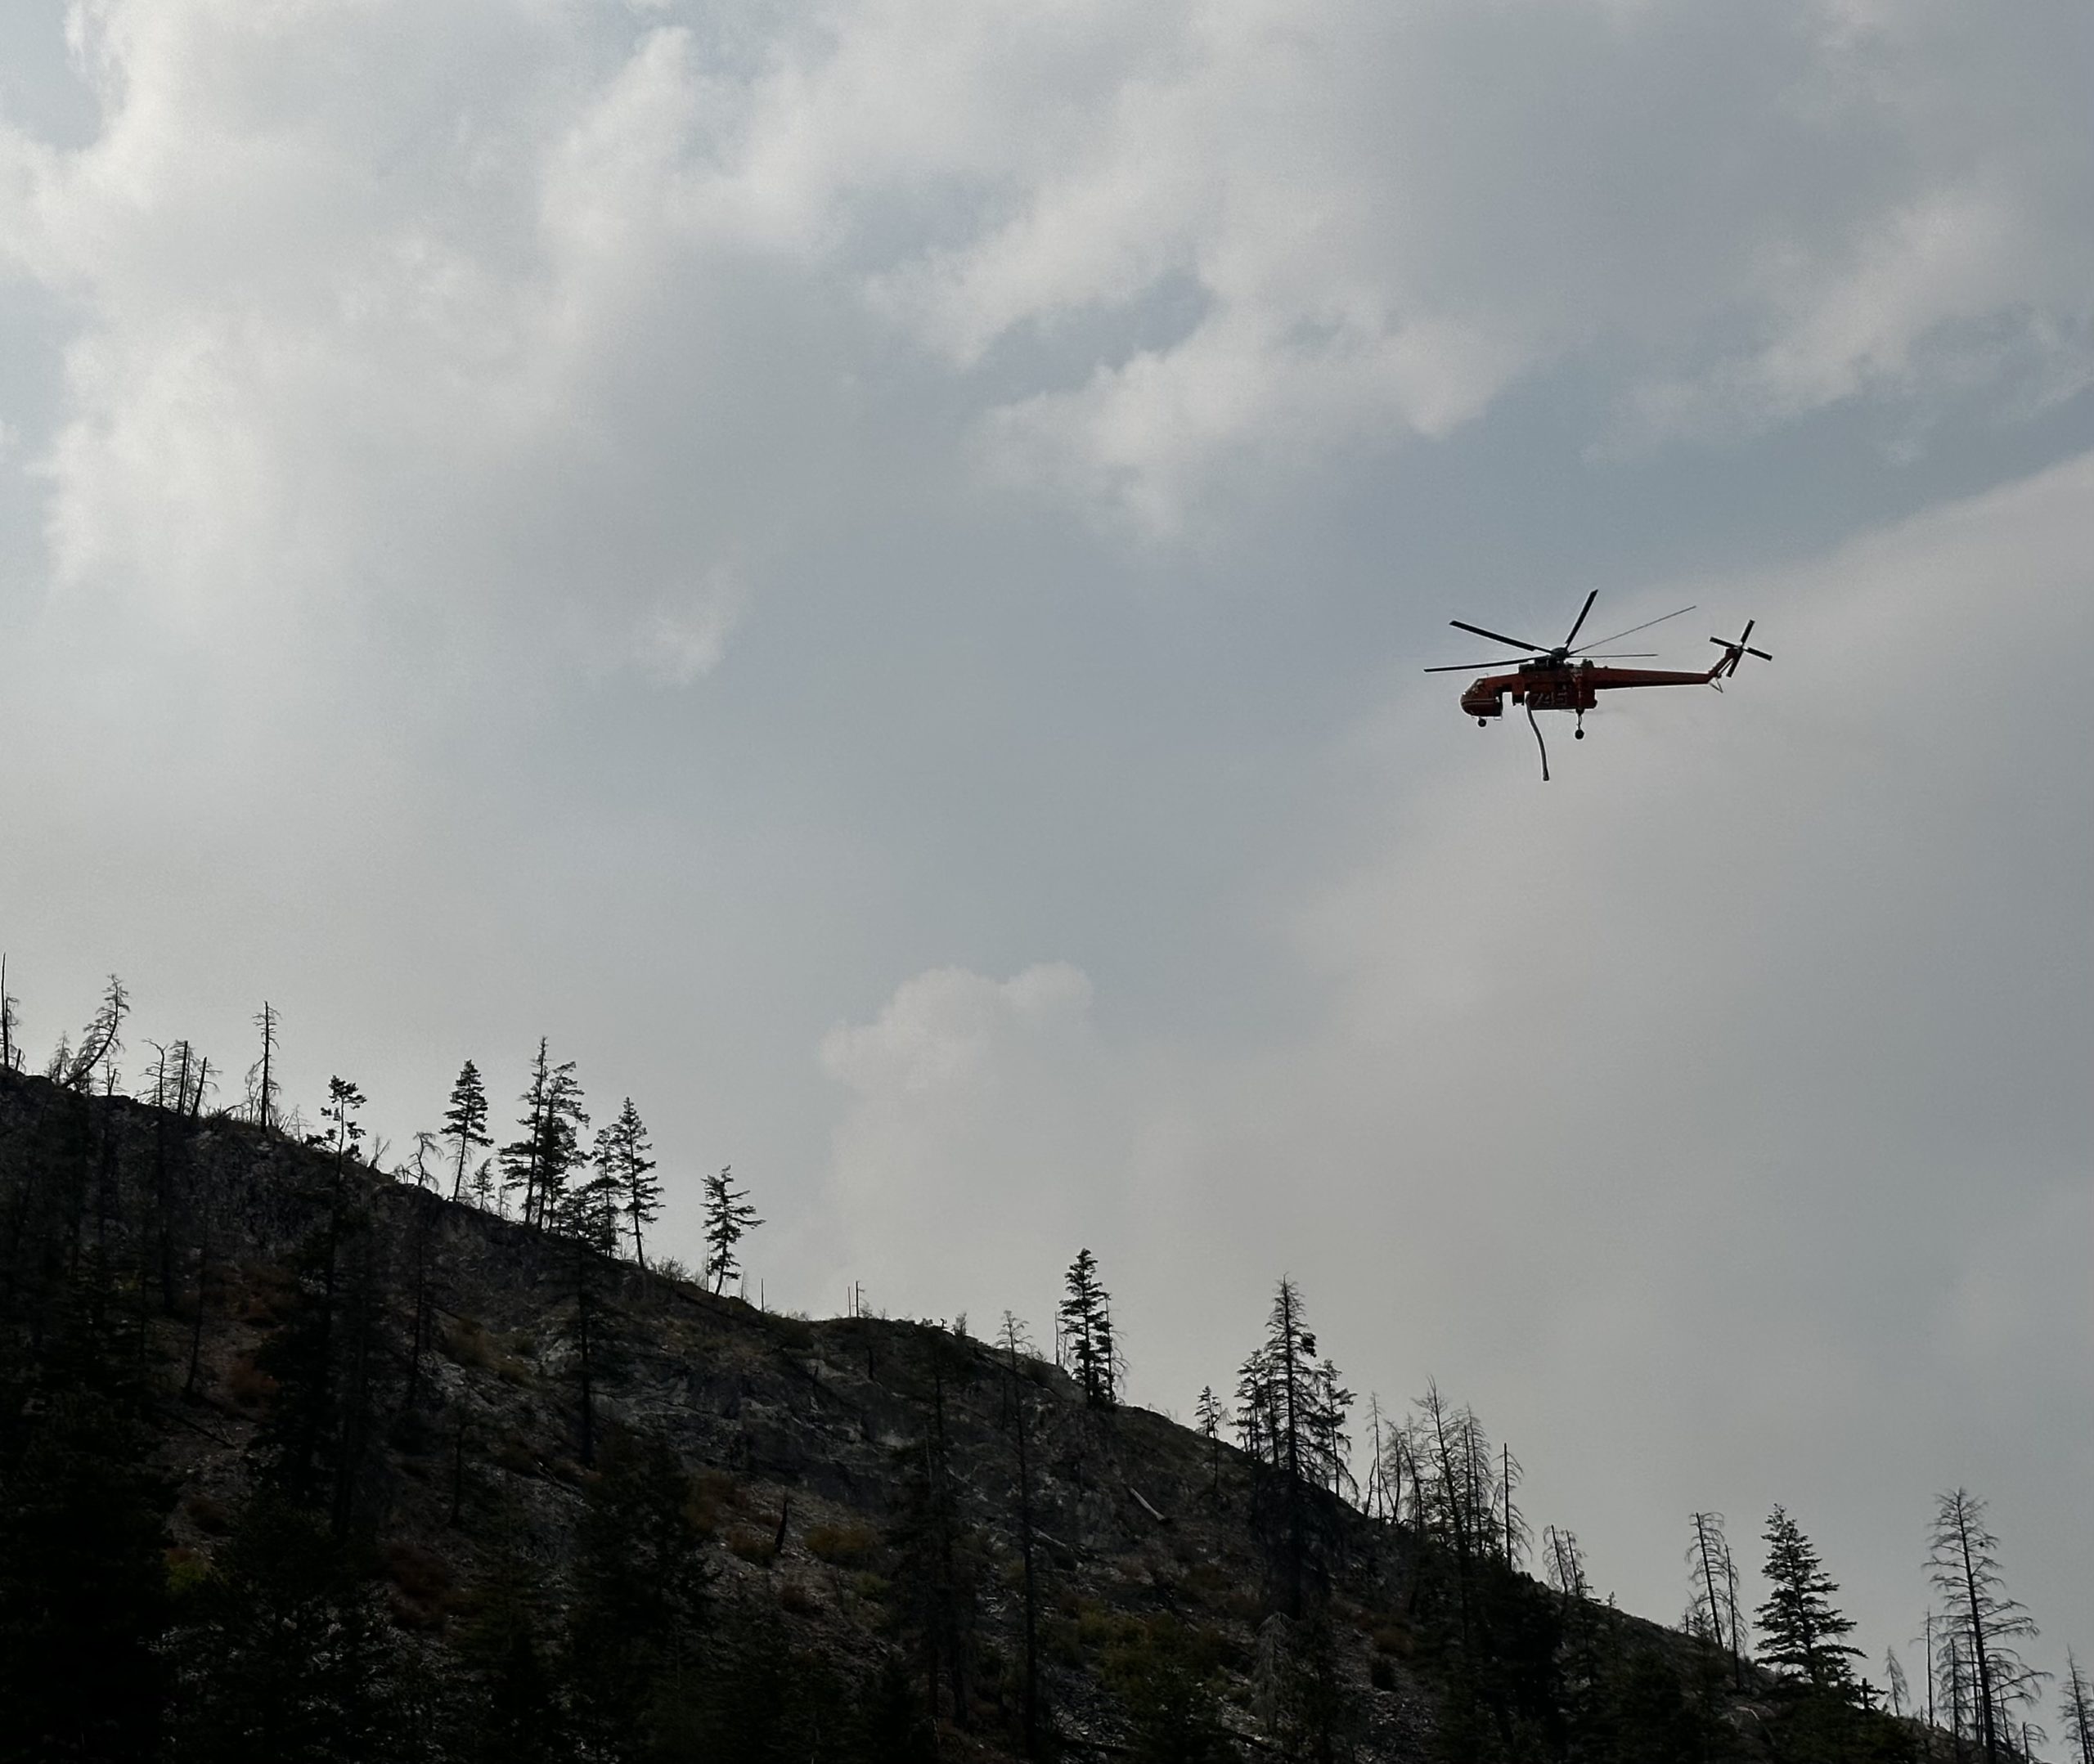 With improved conditions, evacuation orders in Kelowna downgraded